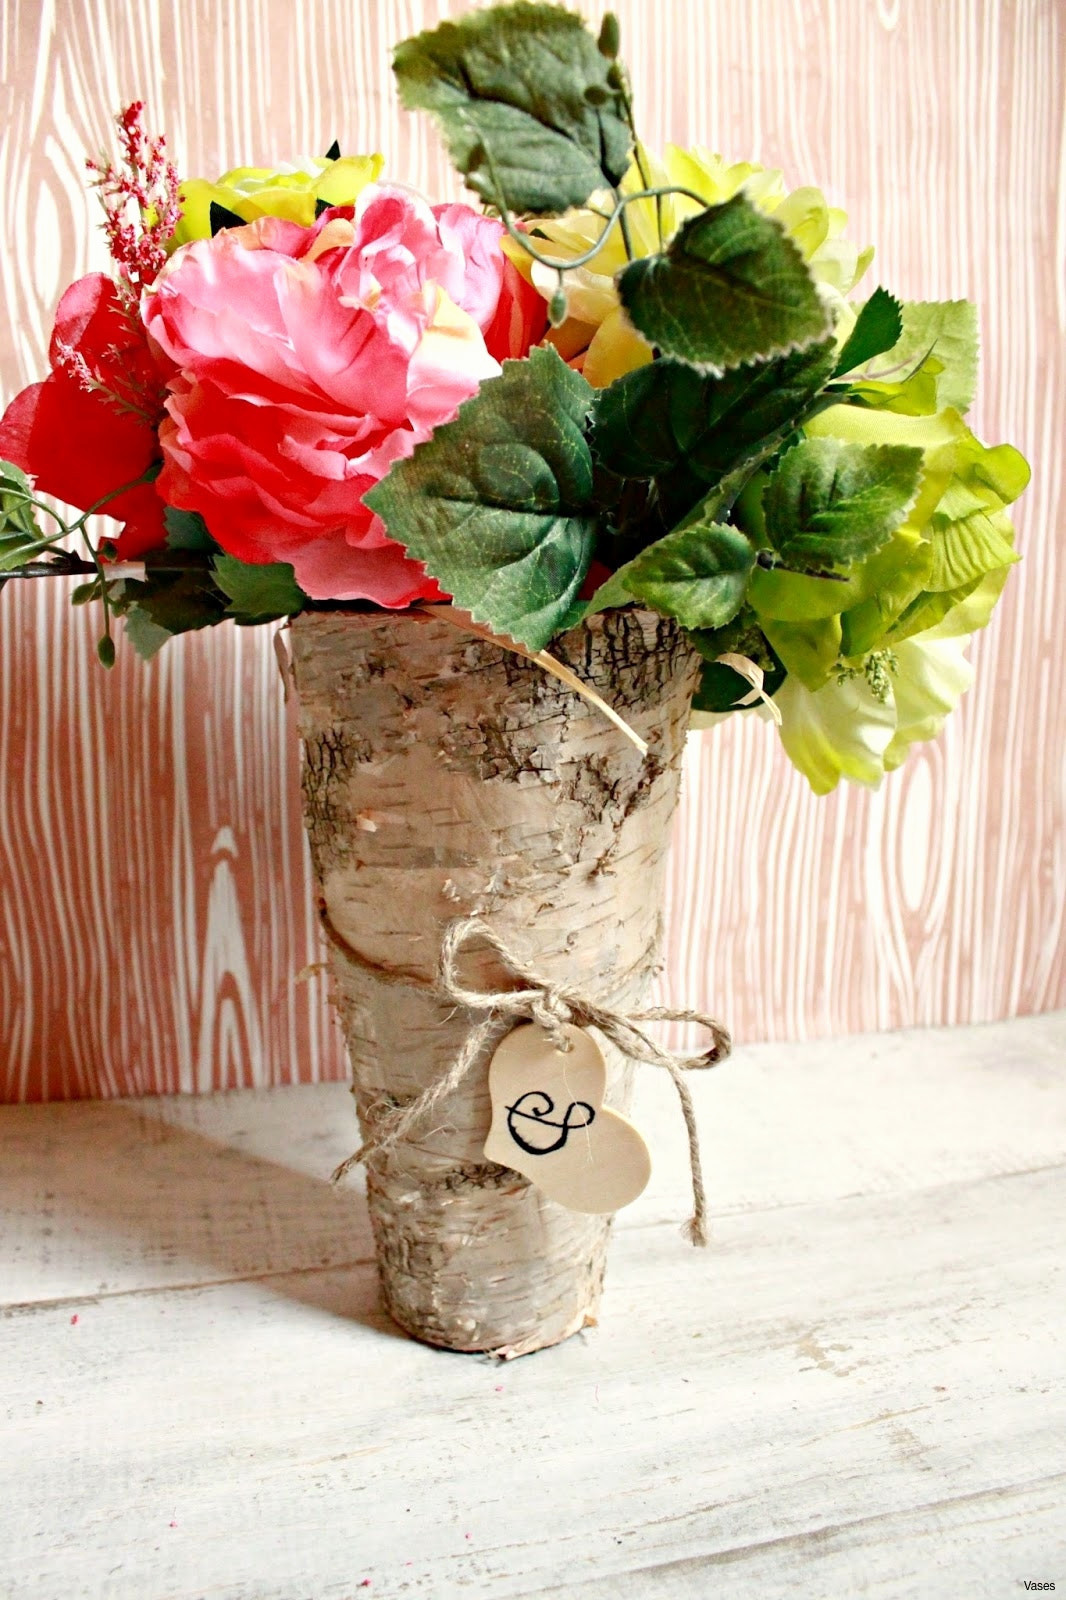 hydrangea in vase of where to buy wedding decorations inspirational flowers and in where to buy wedding decorations inspirational flowers and decorations for weddings h vases diy wood vase i 0d base